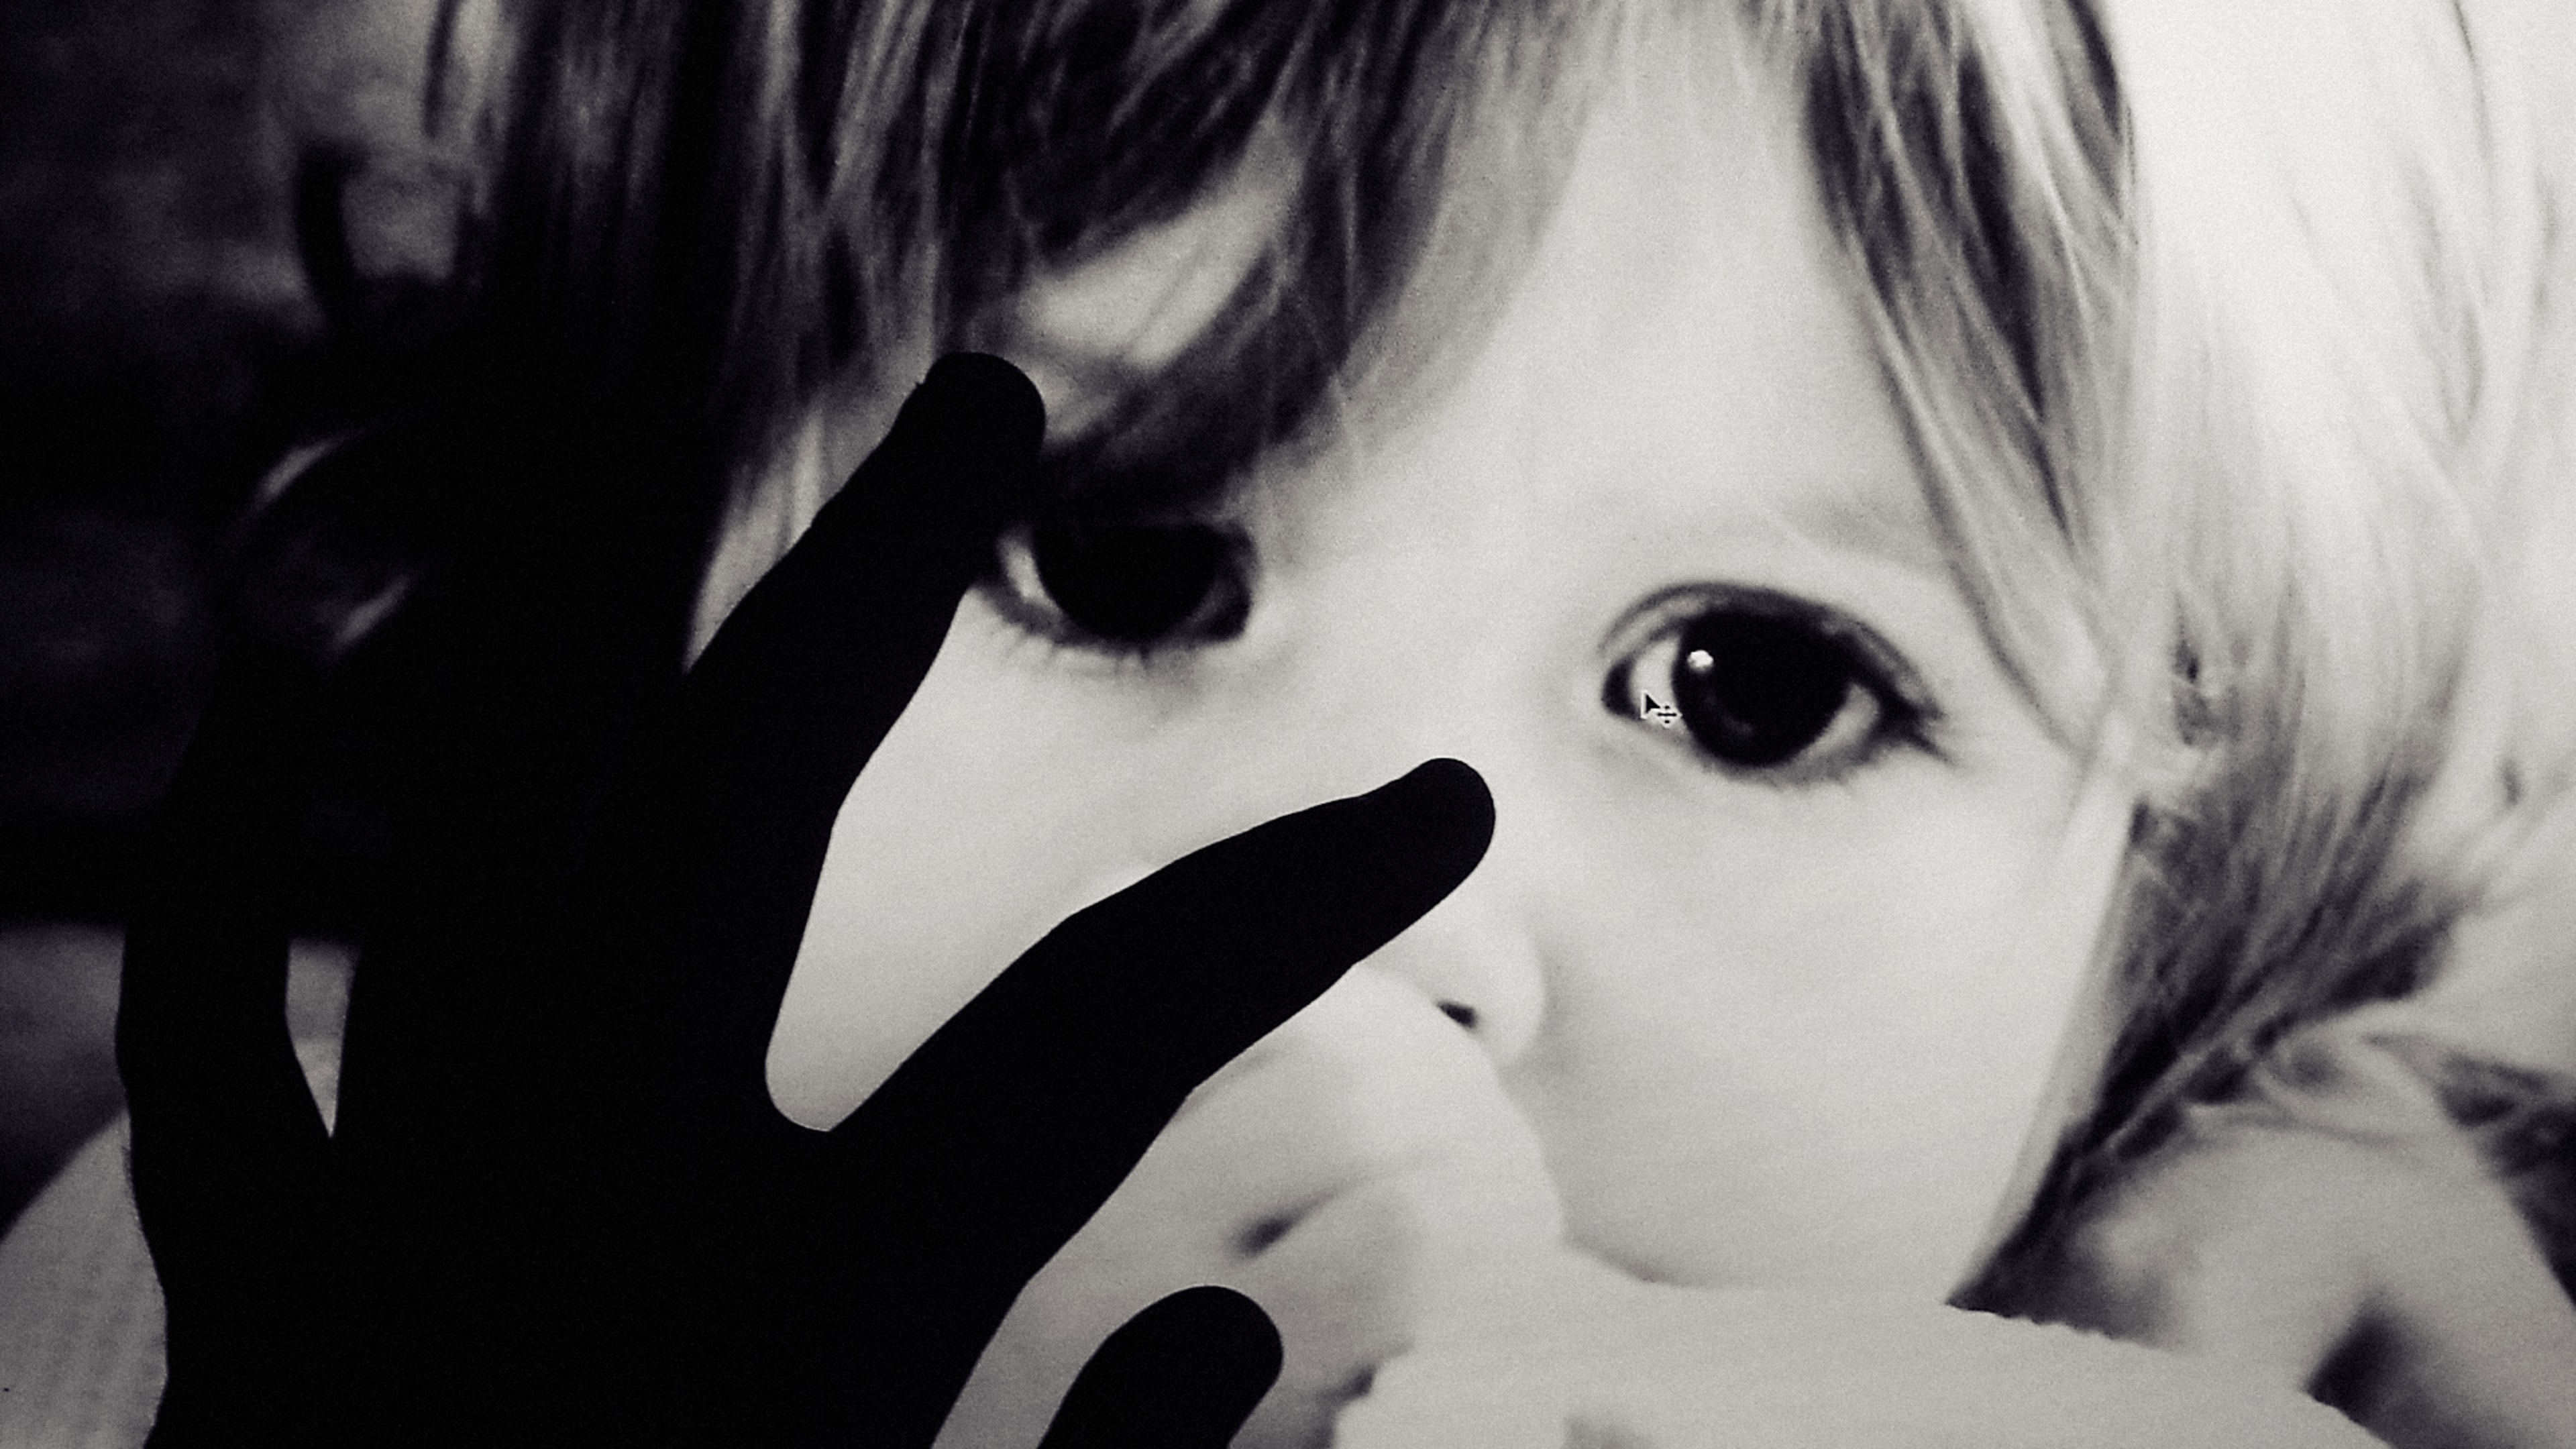 The Creepiest New Corner Of Instagram: Role-Playing With Stolen Baby Photos